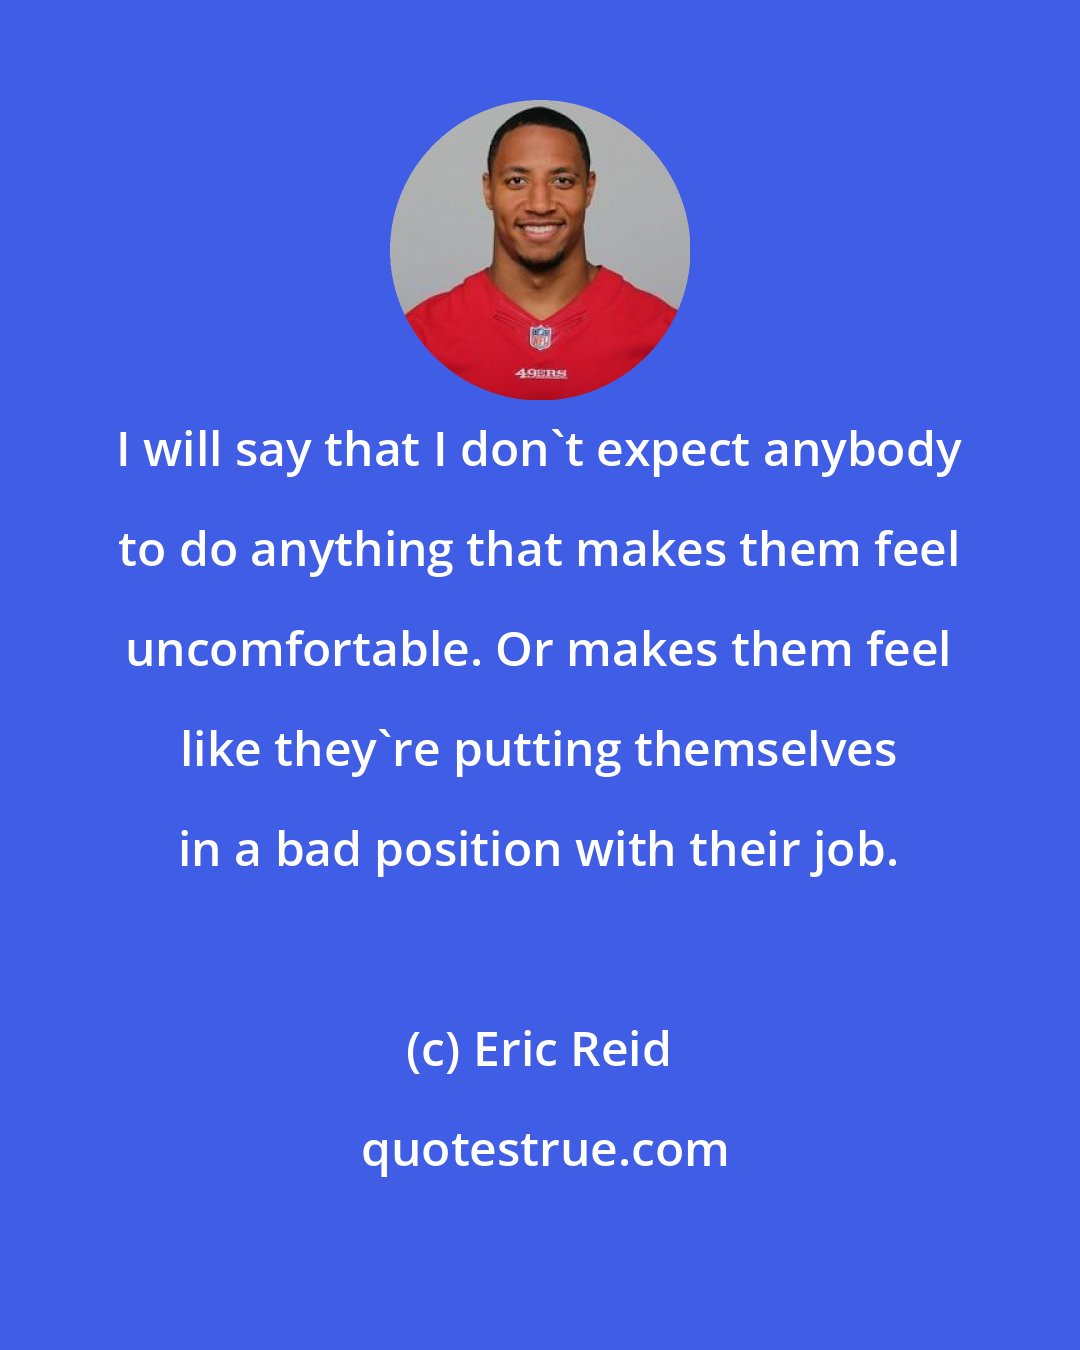 Eric Reid: I will say that I don't expect anybody to do anything that makes them feel uncomfortable. Or makes them feel like they're putting themselves in a bad position with their job.